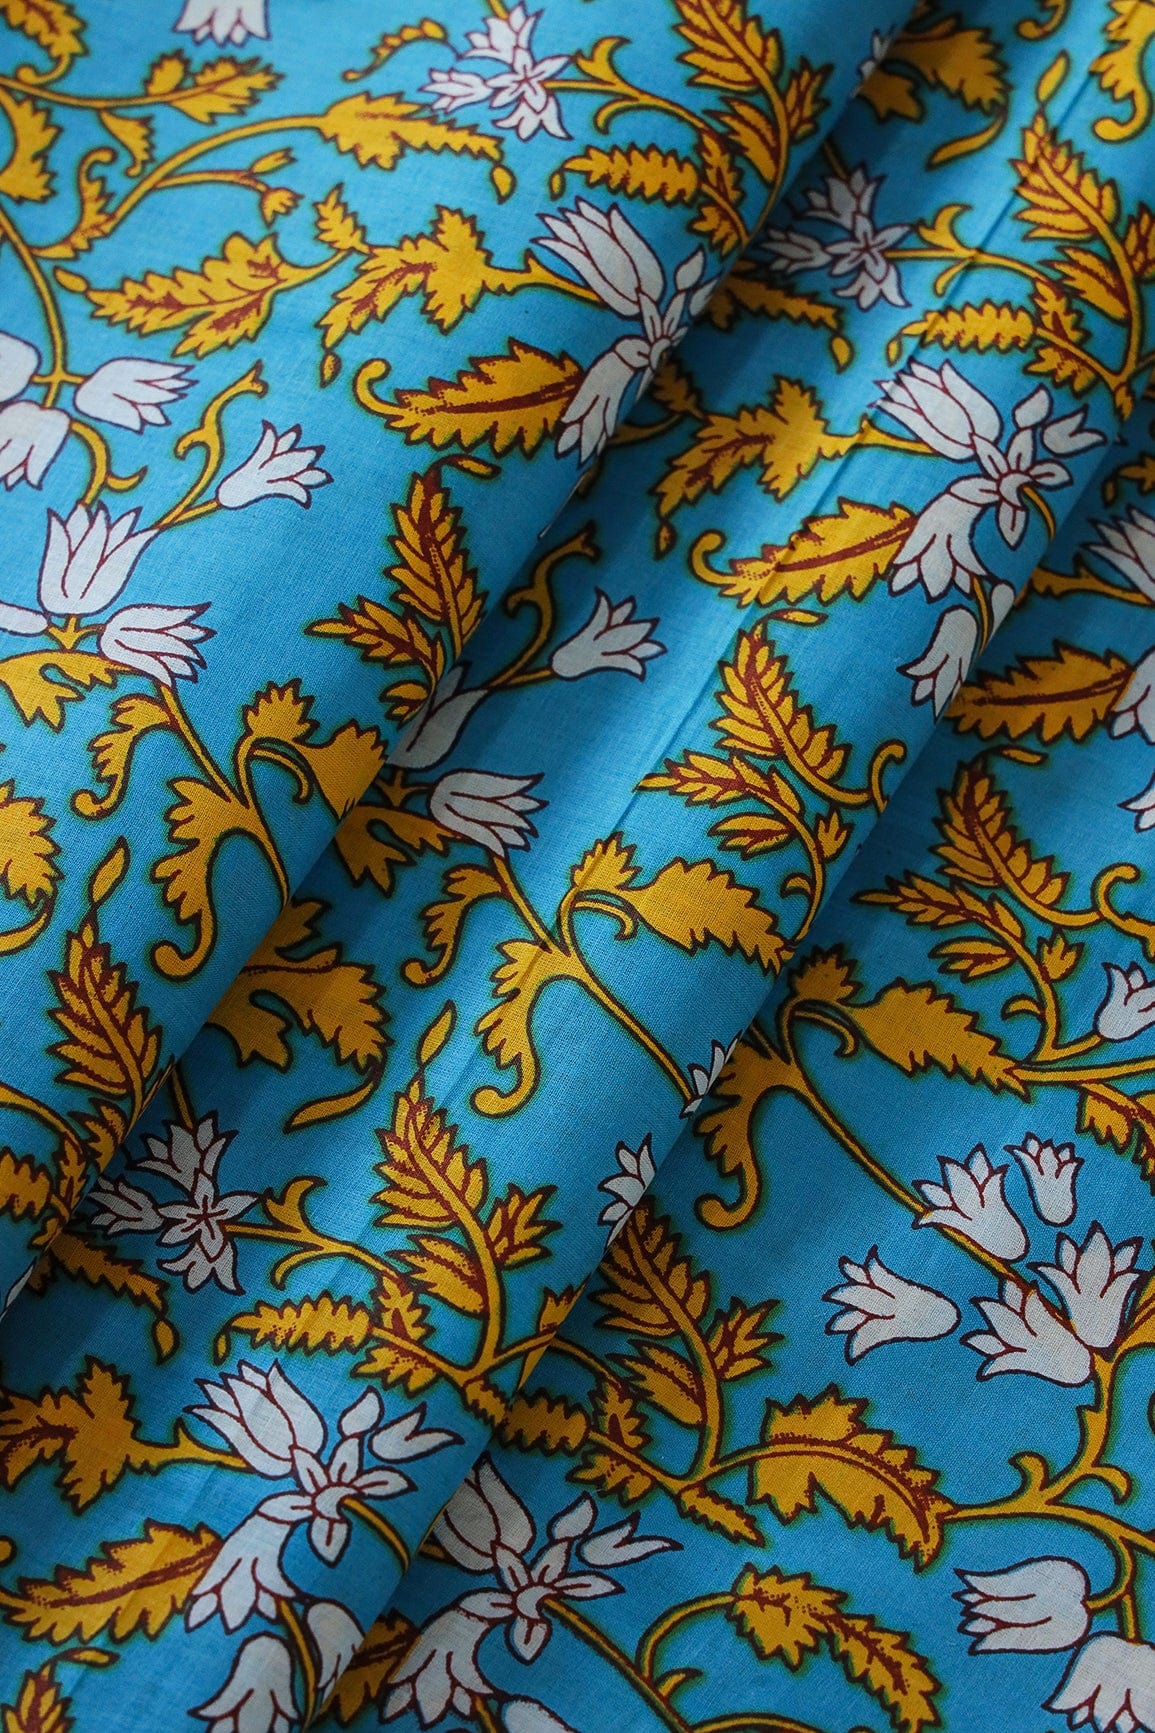 doeraa Prints Yellow And White Floral Print On Blue Pure Cotton Fabric